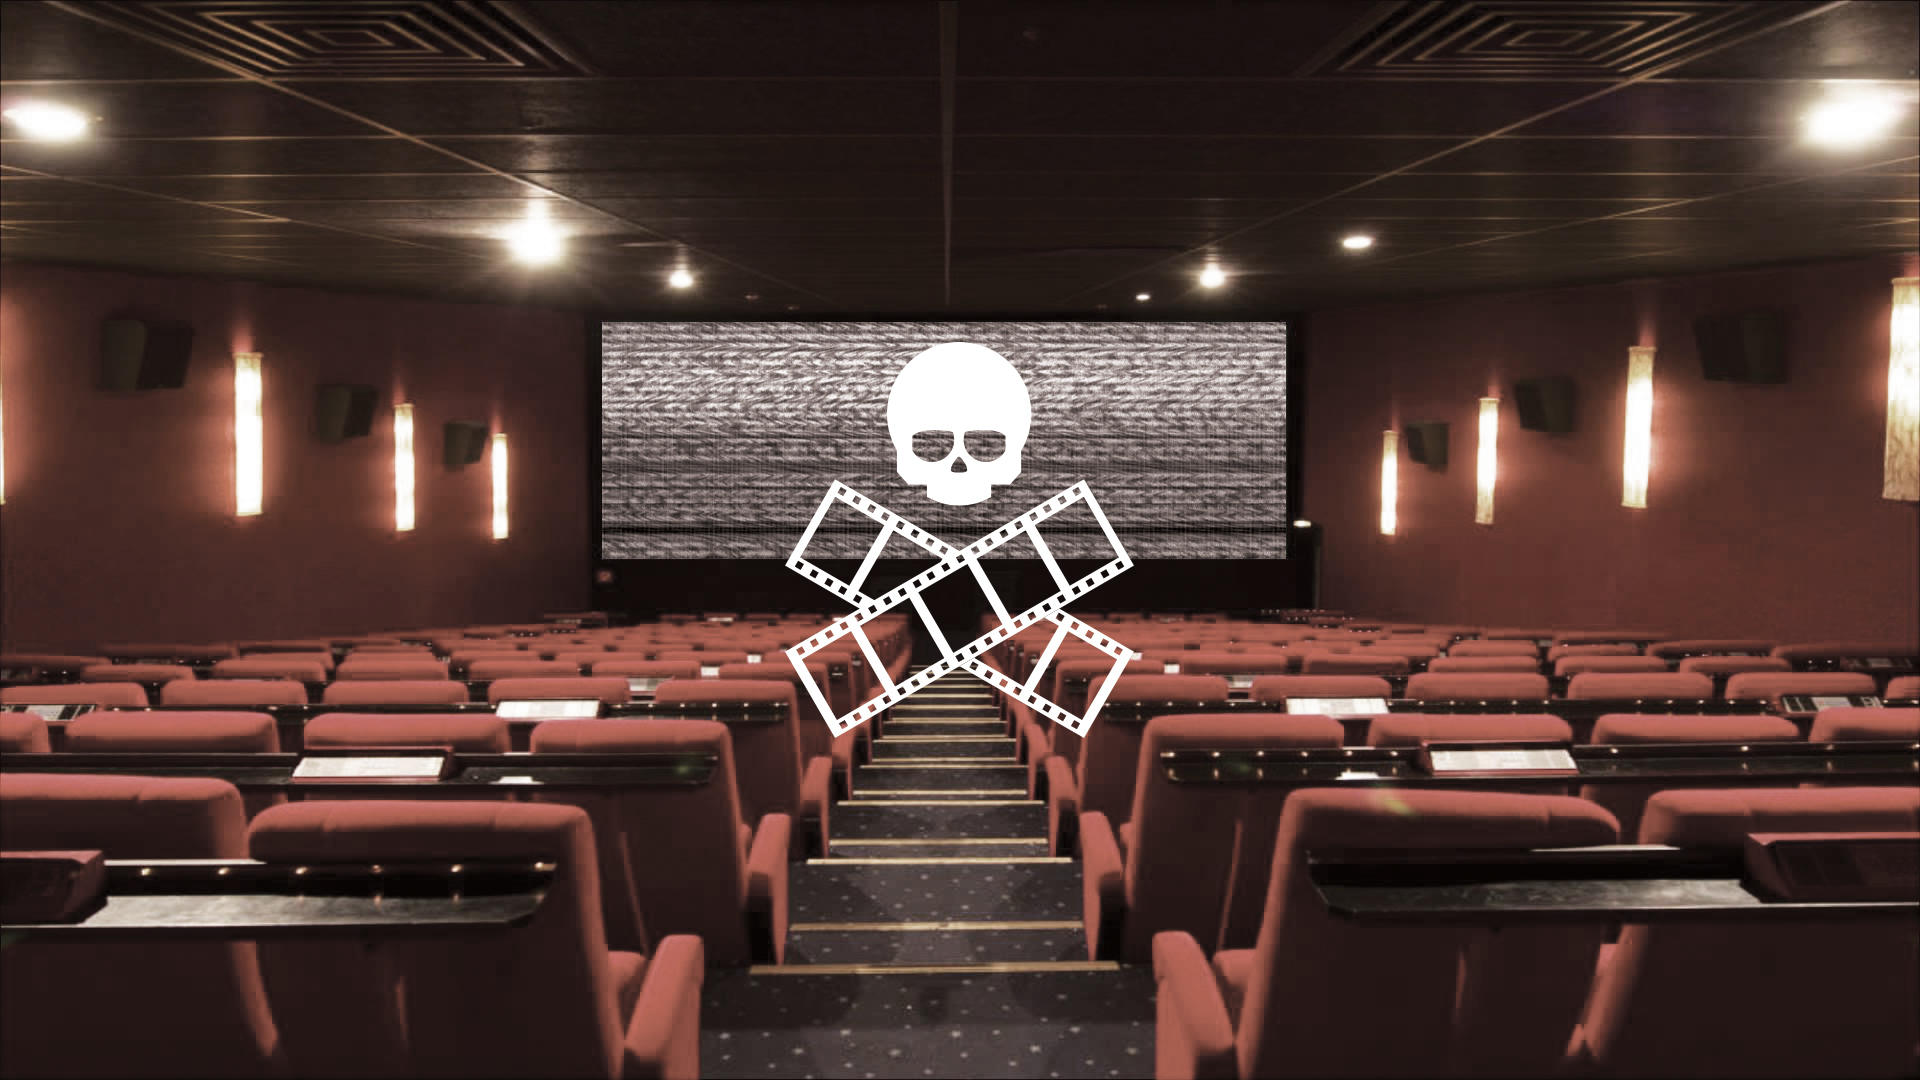 131. The End of MoviePass